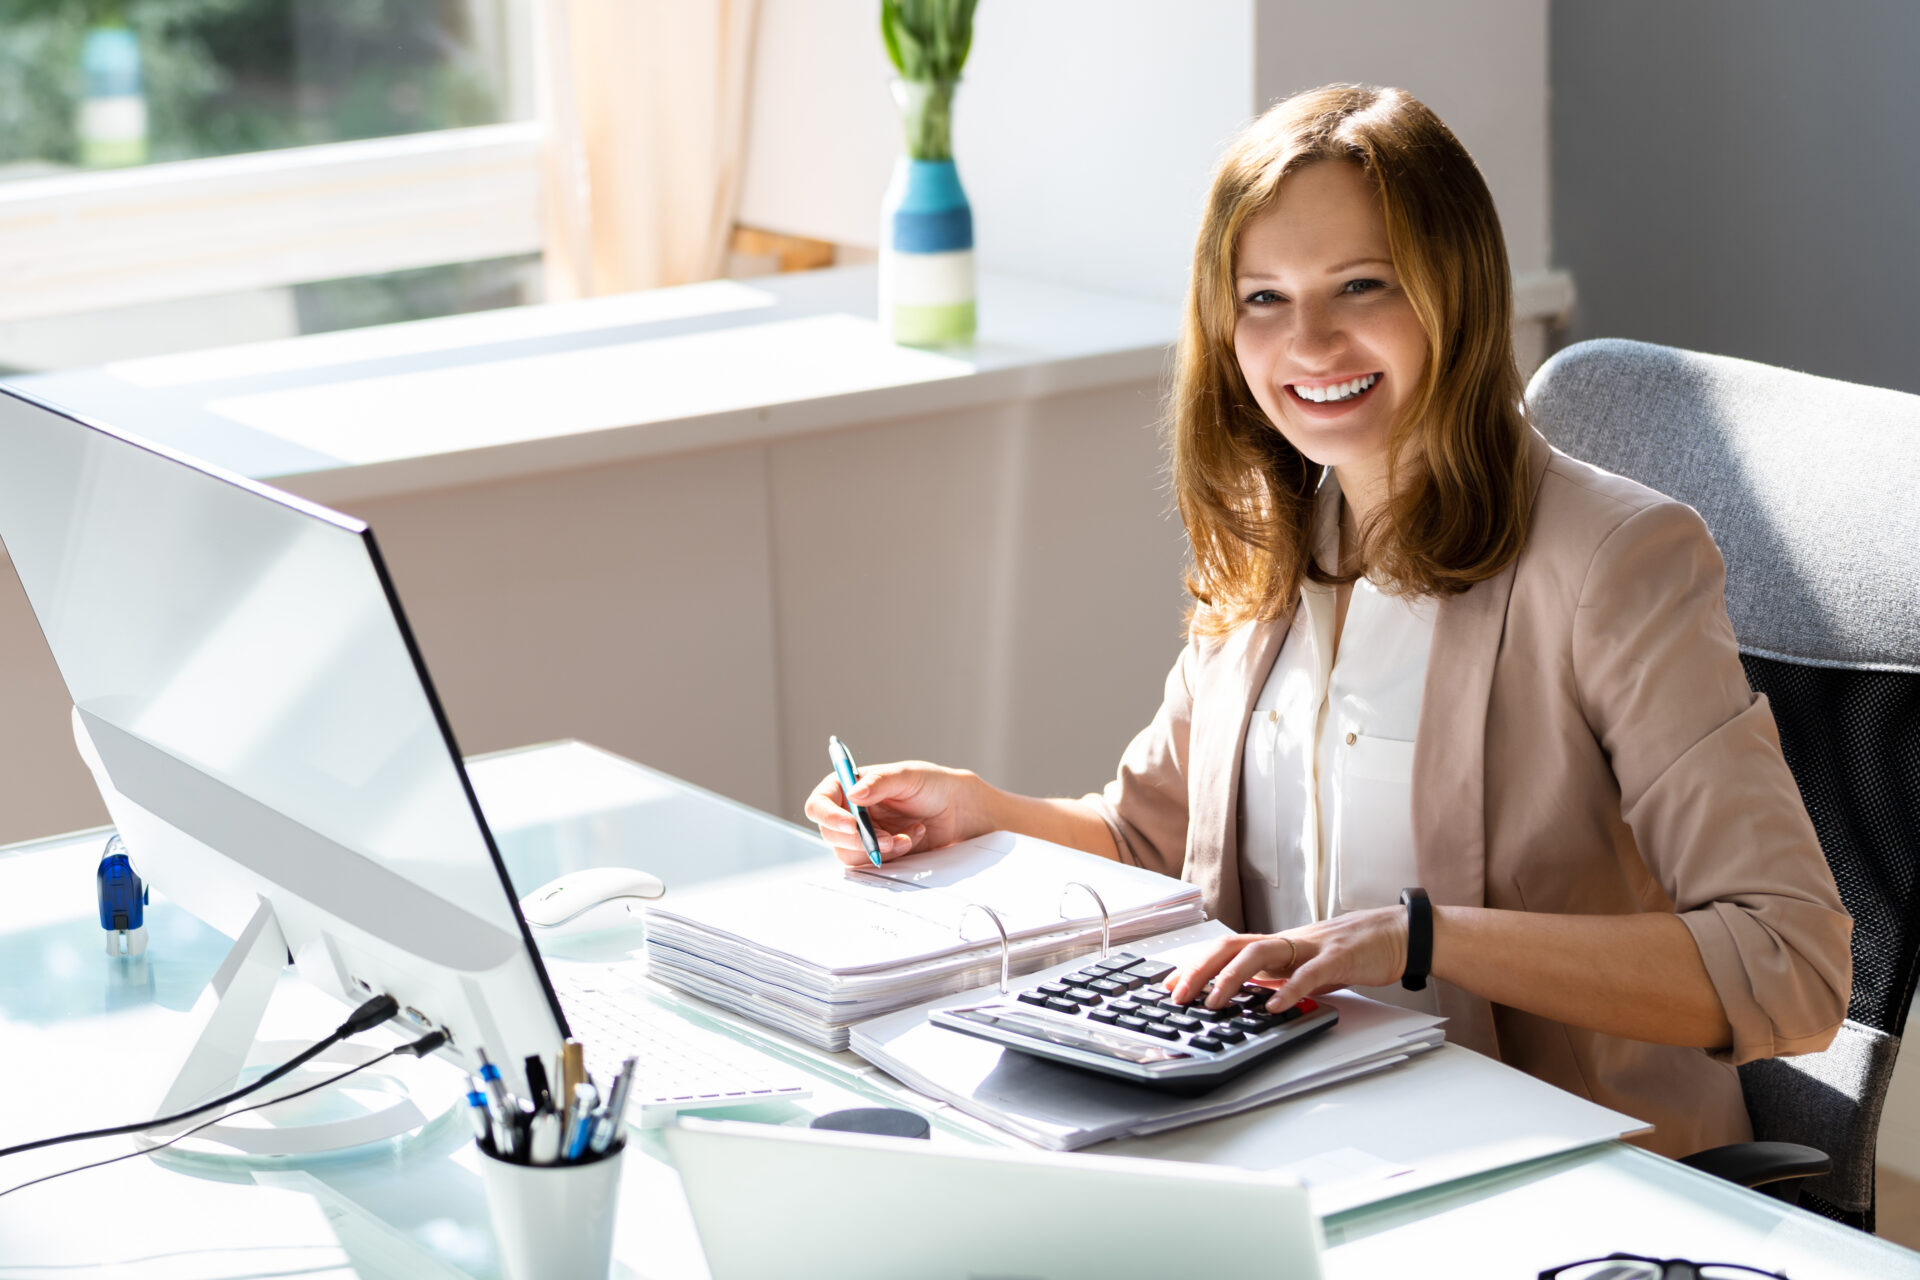 https://www.claytoncartercpa.com/wp-content/uploads/2024/03/Featured-image-woman-at-her-desk-crunching-numbers-and-smiling-at-the-camera.jpeg